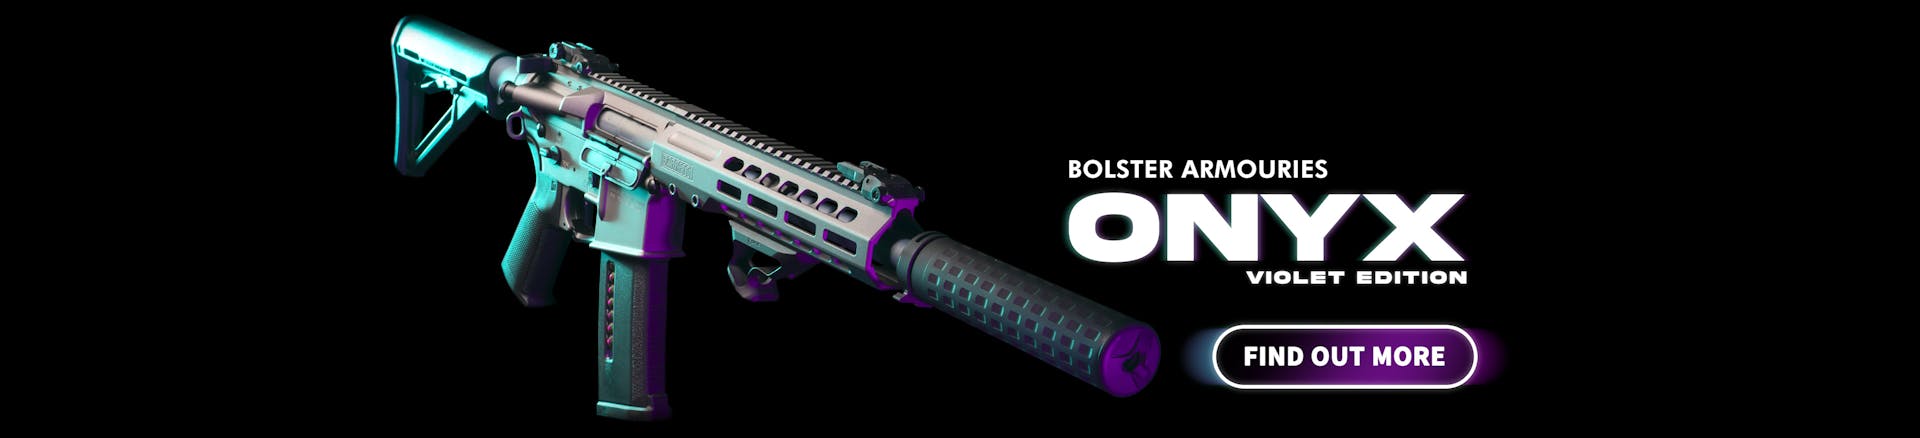 ONYX [Violet Edition] | Bolster Armouries